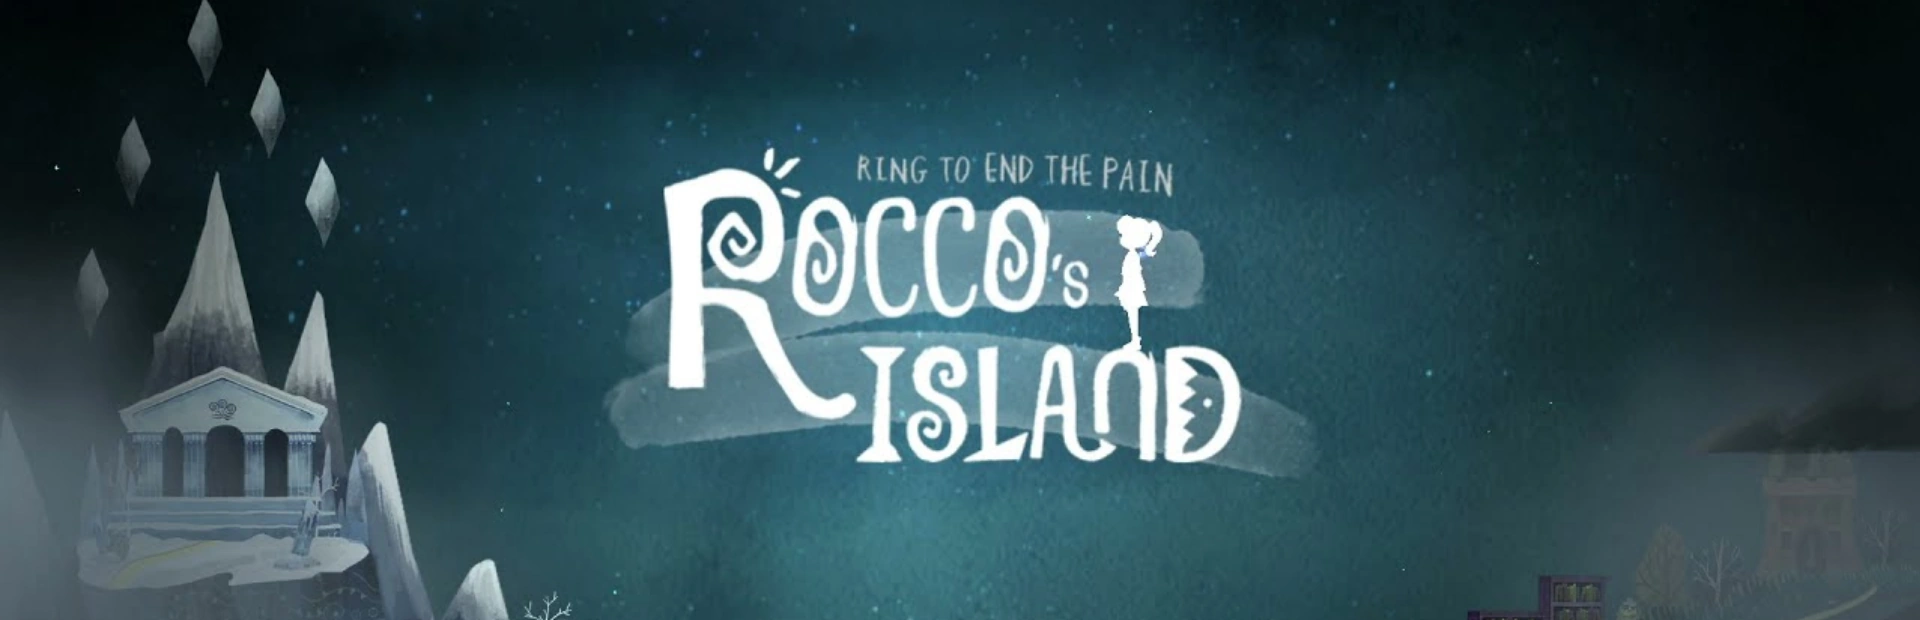 Roccos Island.Ring .to .End .the .Pain .banner1